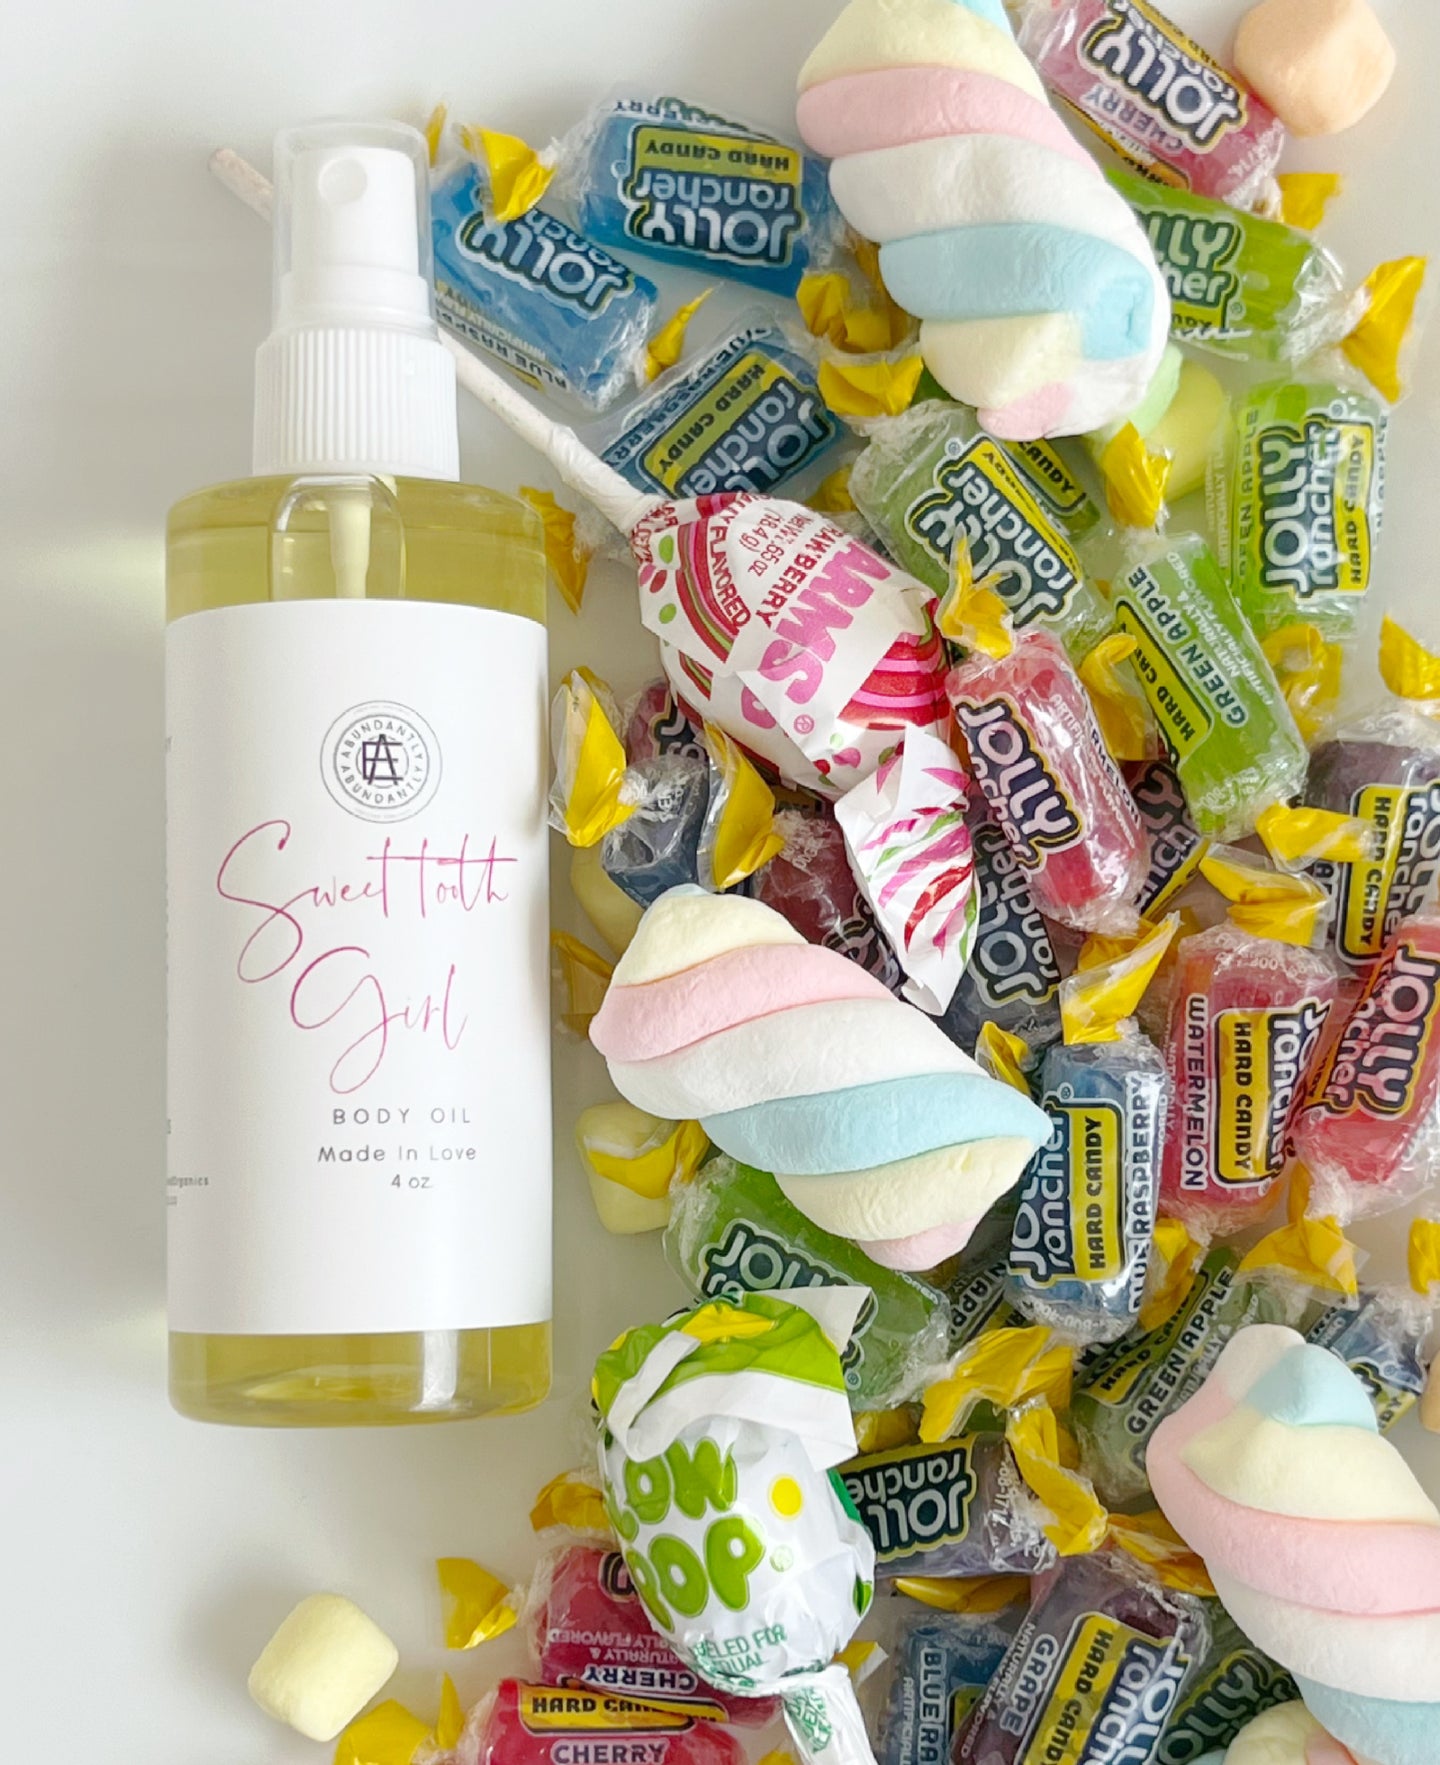 SweetTooth Girl Body Oil